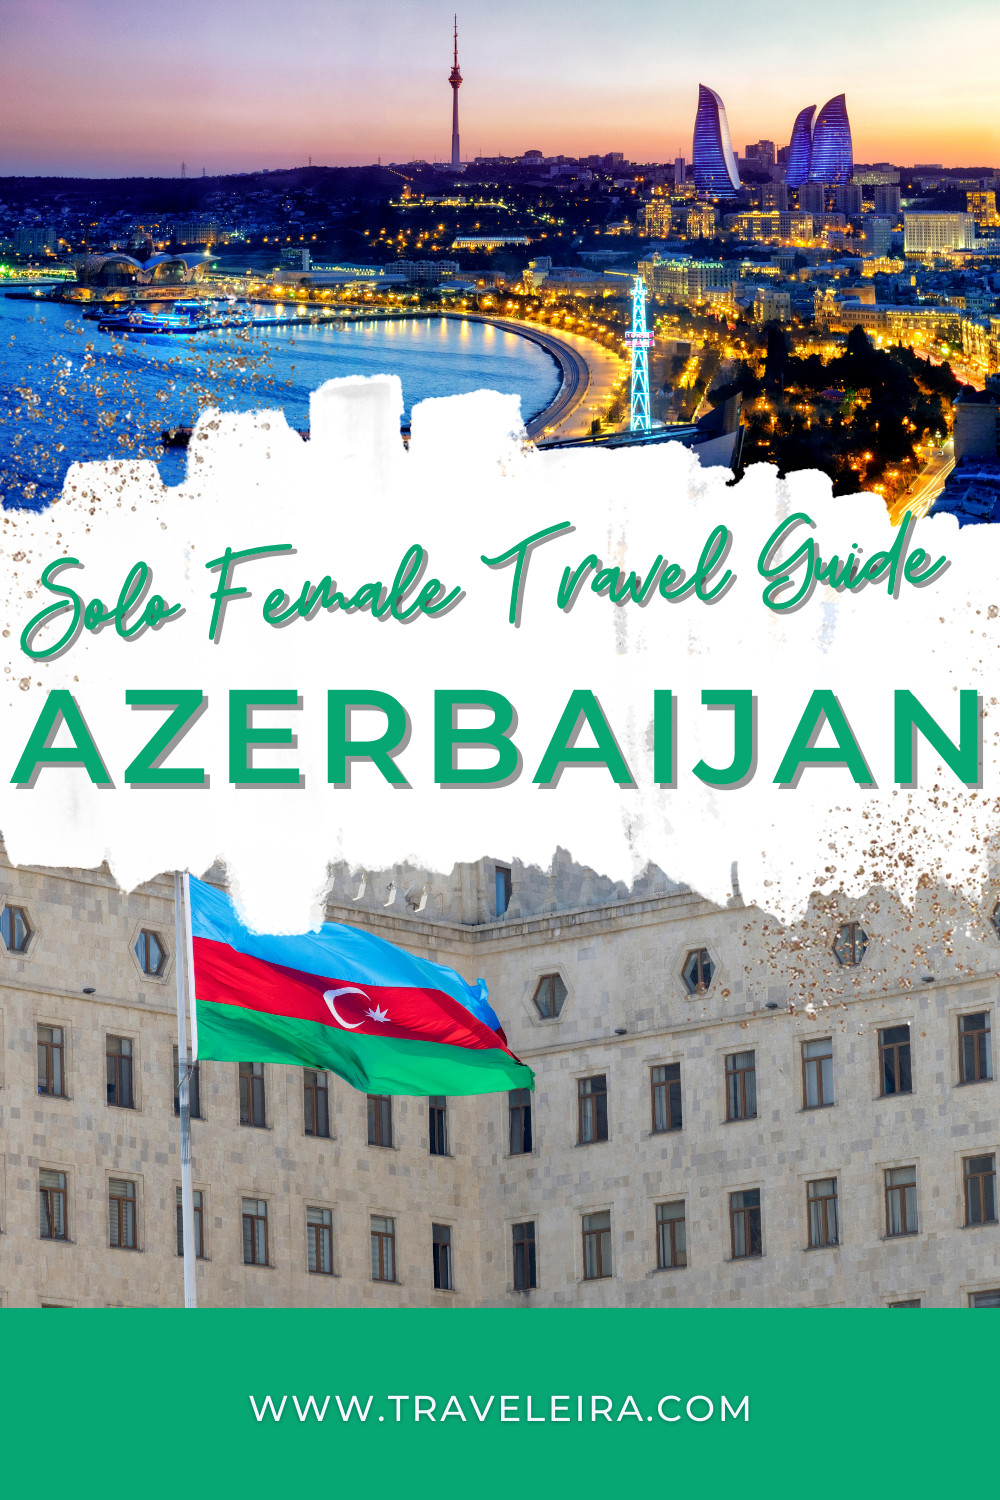 Our Azerbaijan Solo Female Travel Comprehensive Guide has all the tips and tricks you need to explore Azerbaijan.